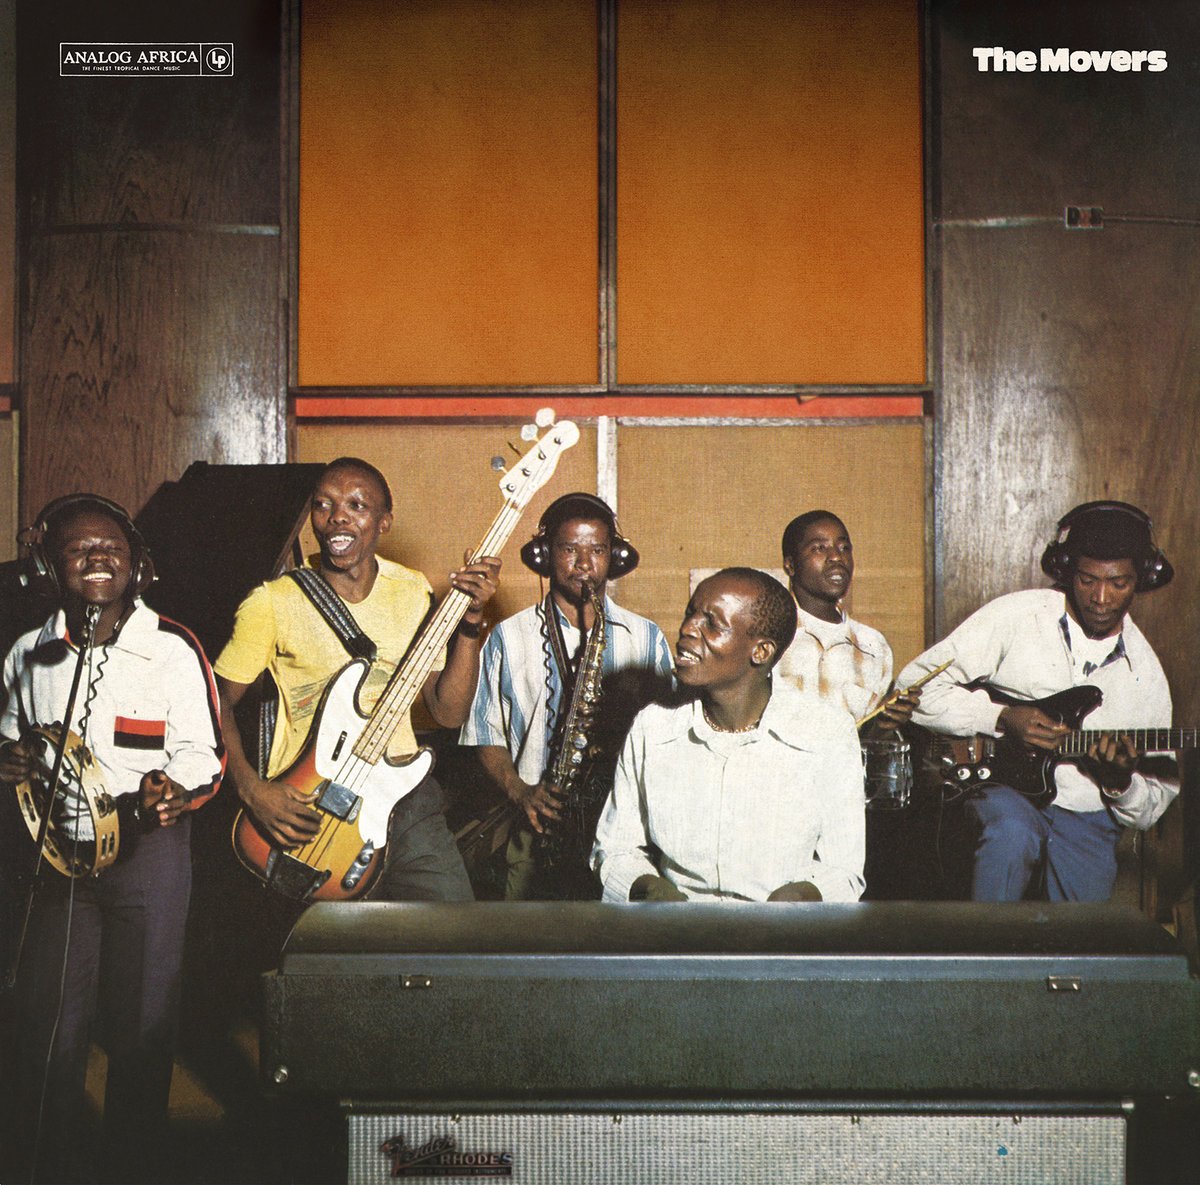 The Movers - Vol 1. - 1970-1976